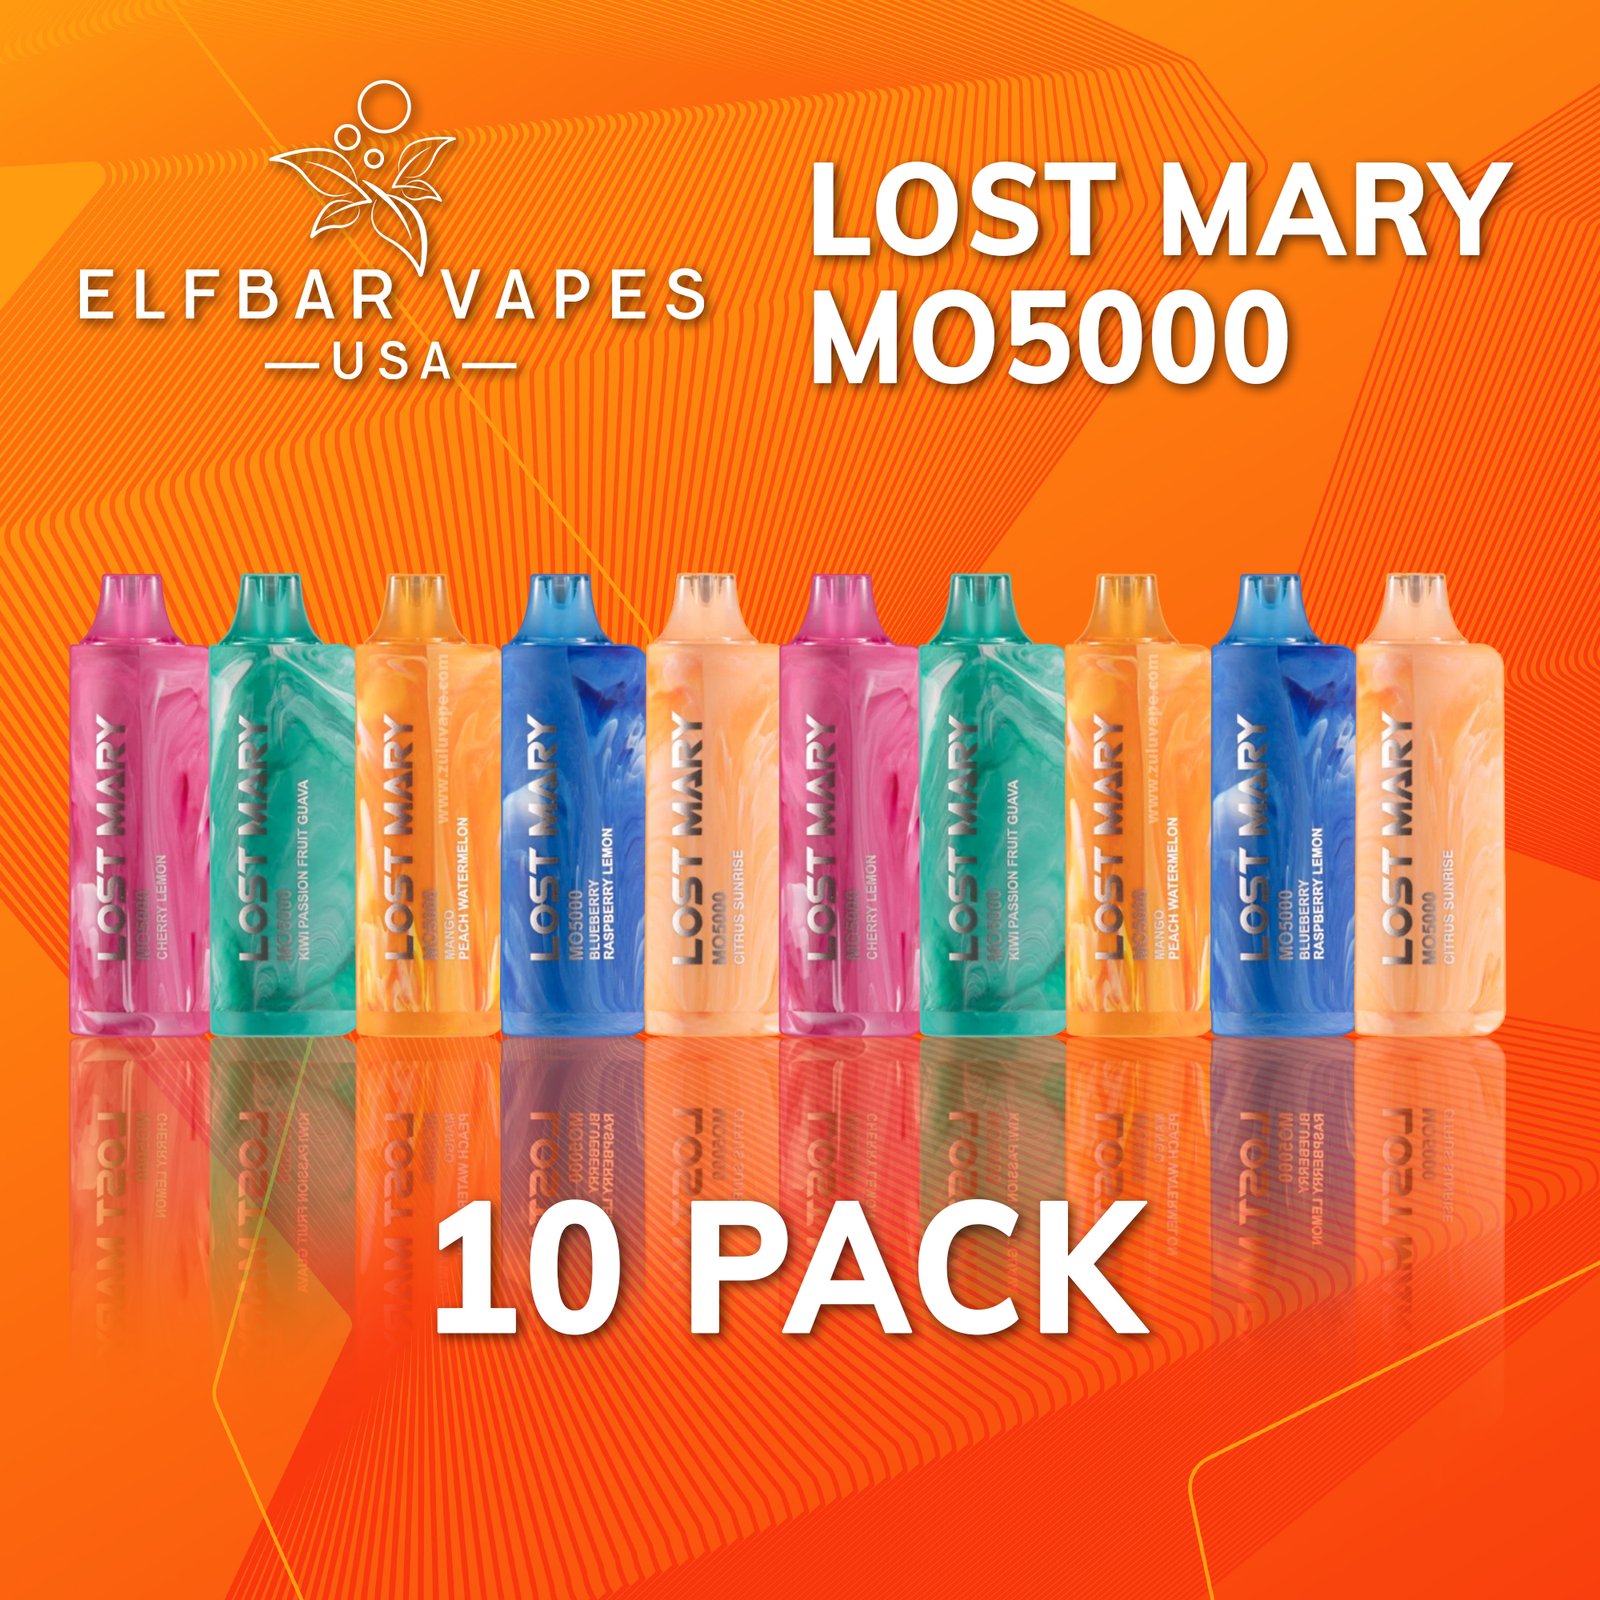 Lost Mary MO5000 10 pack